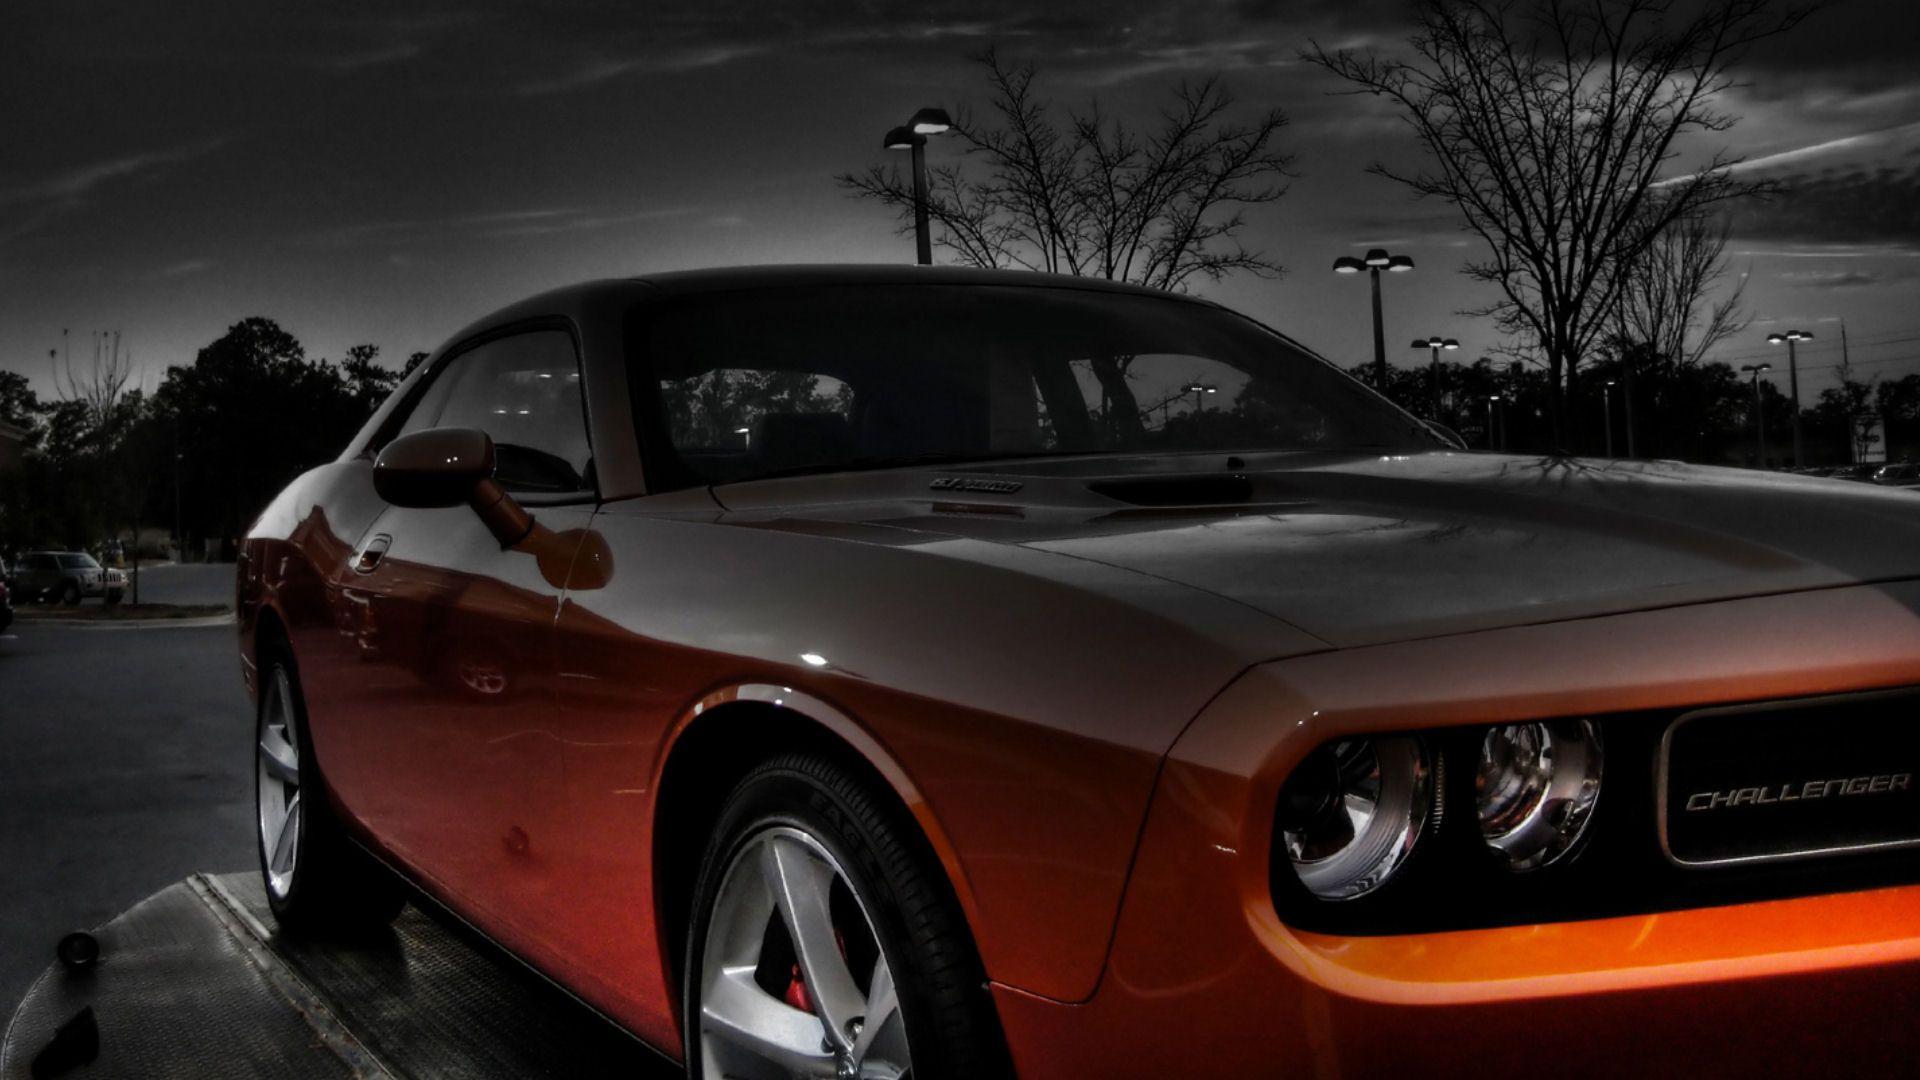 American Muscle Cars Wallpapers HD - Wallpaper Cave